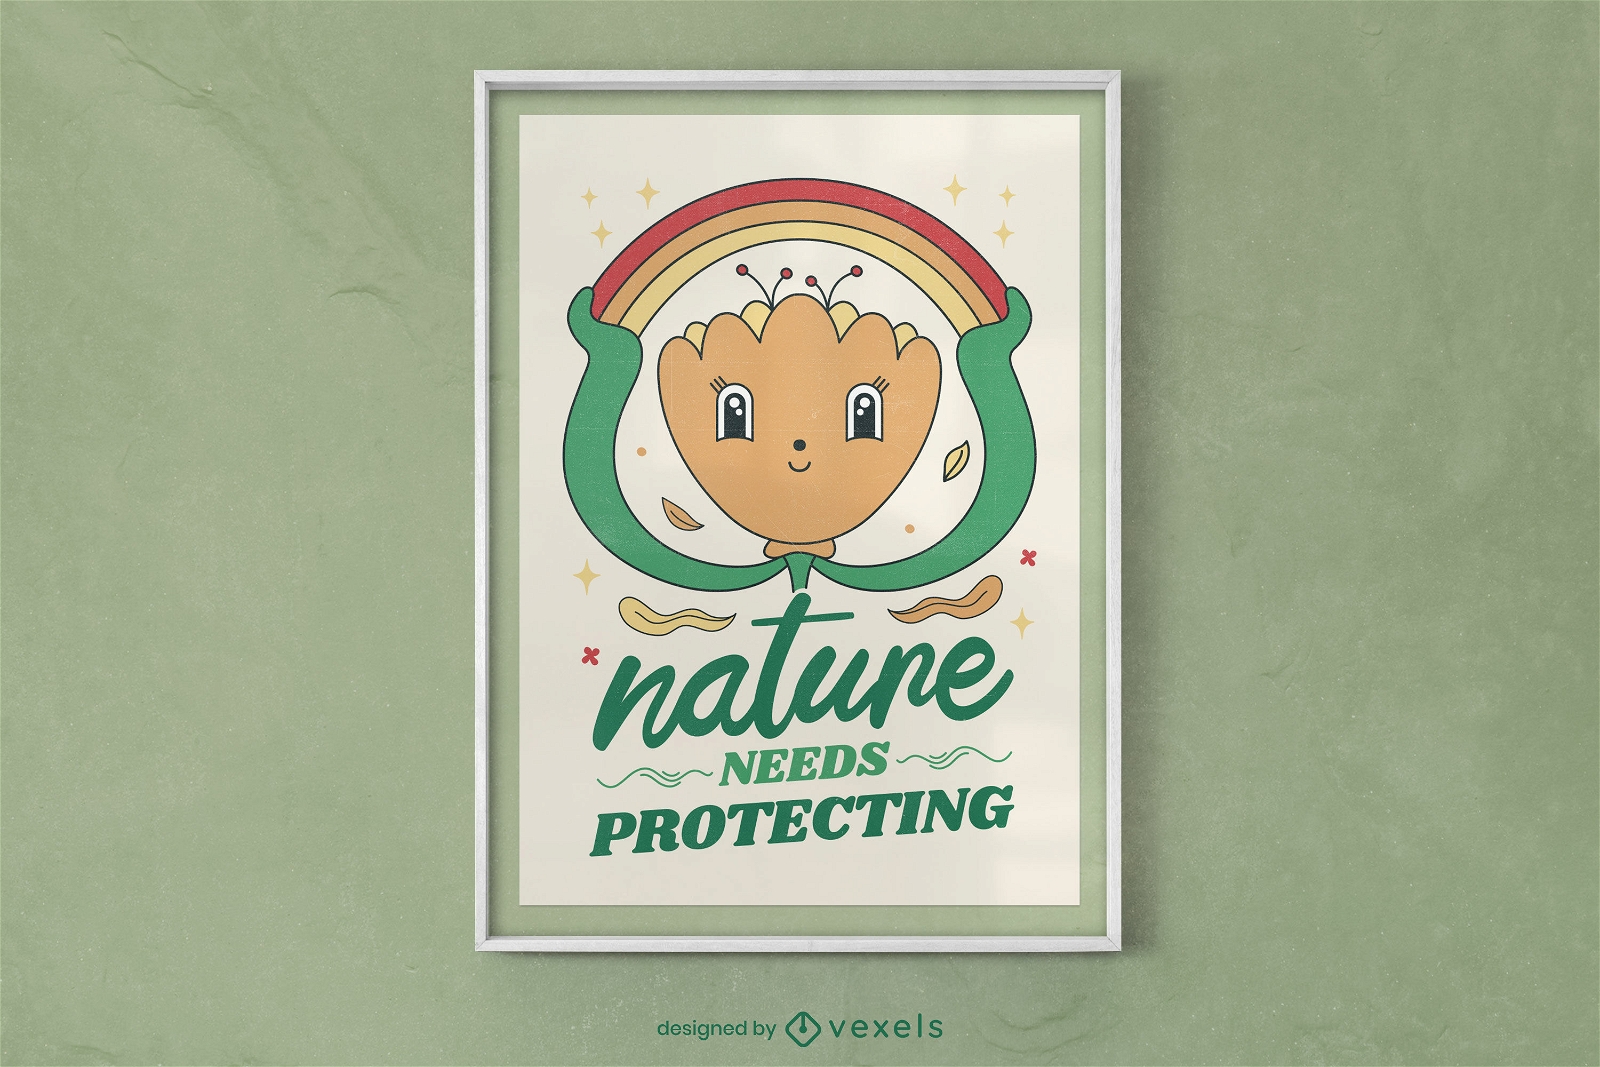 Nature needs protecting poster design